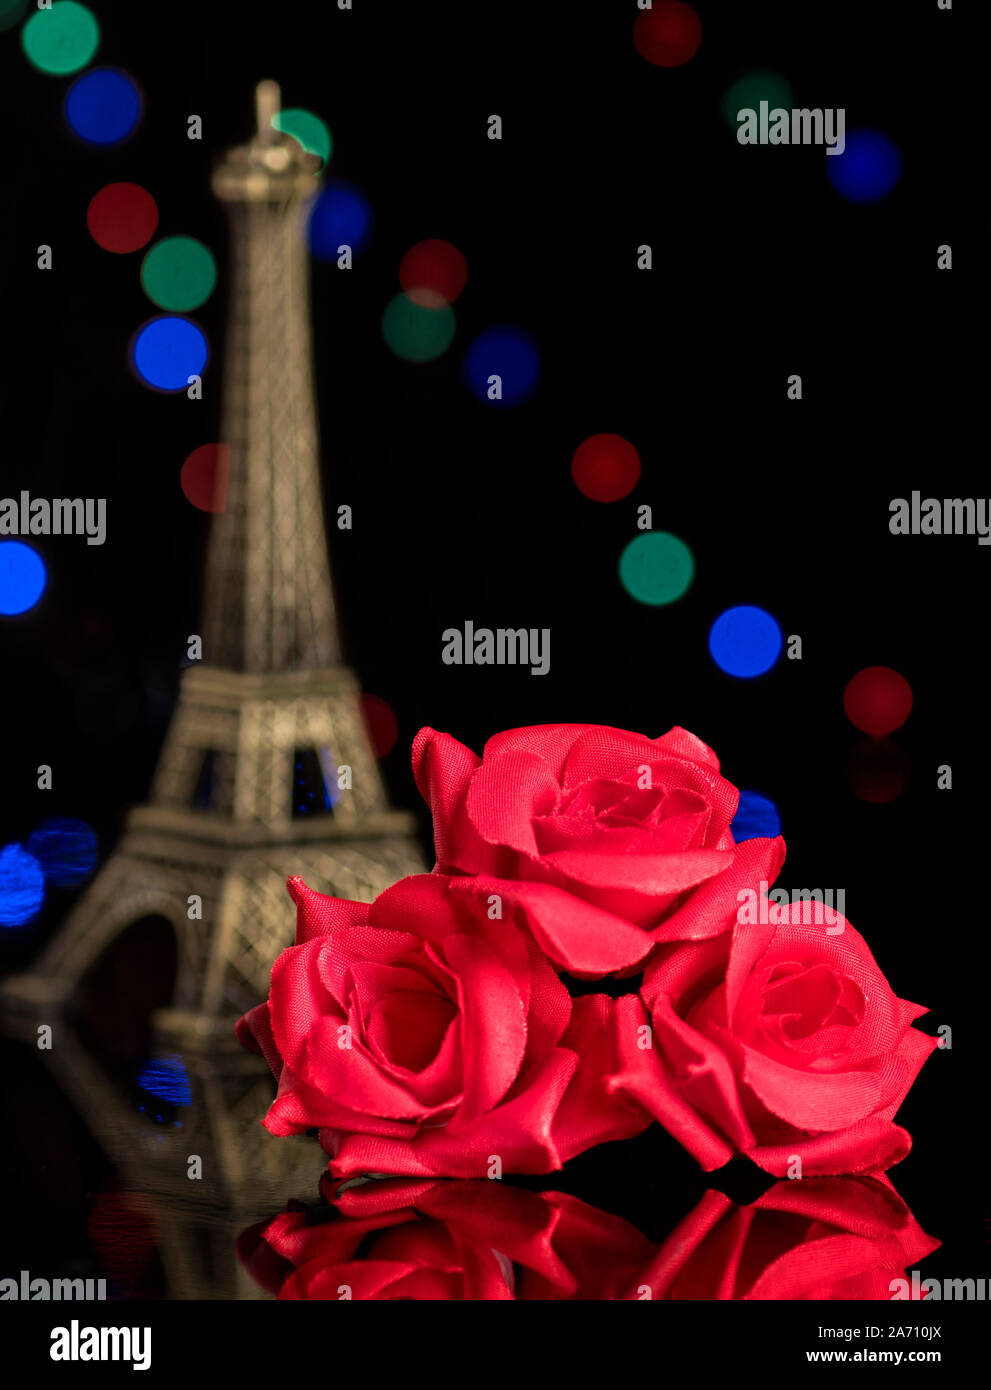 Eiffel tower with flowers.Valentine's day romantic background Stock Photo